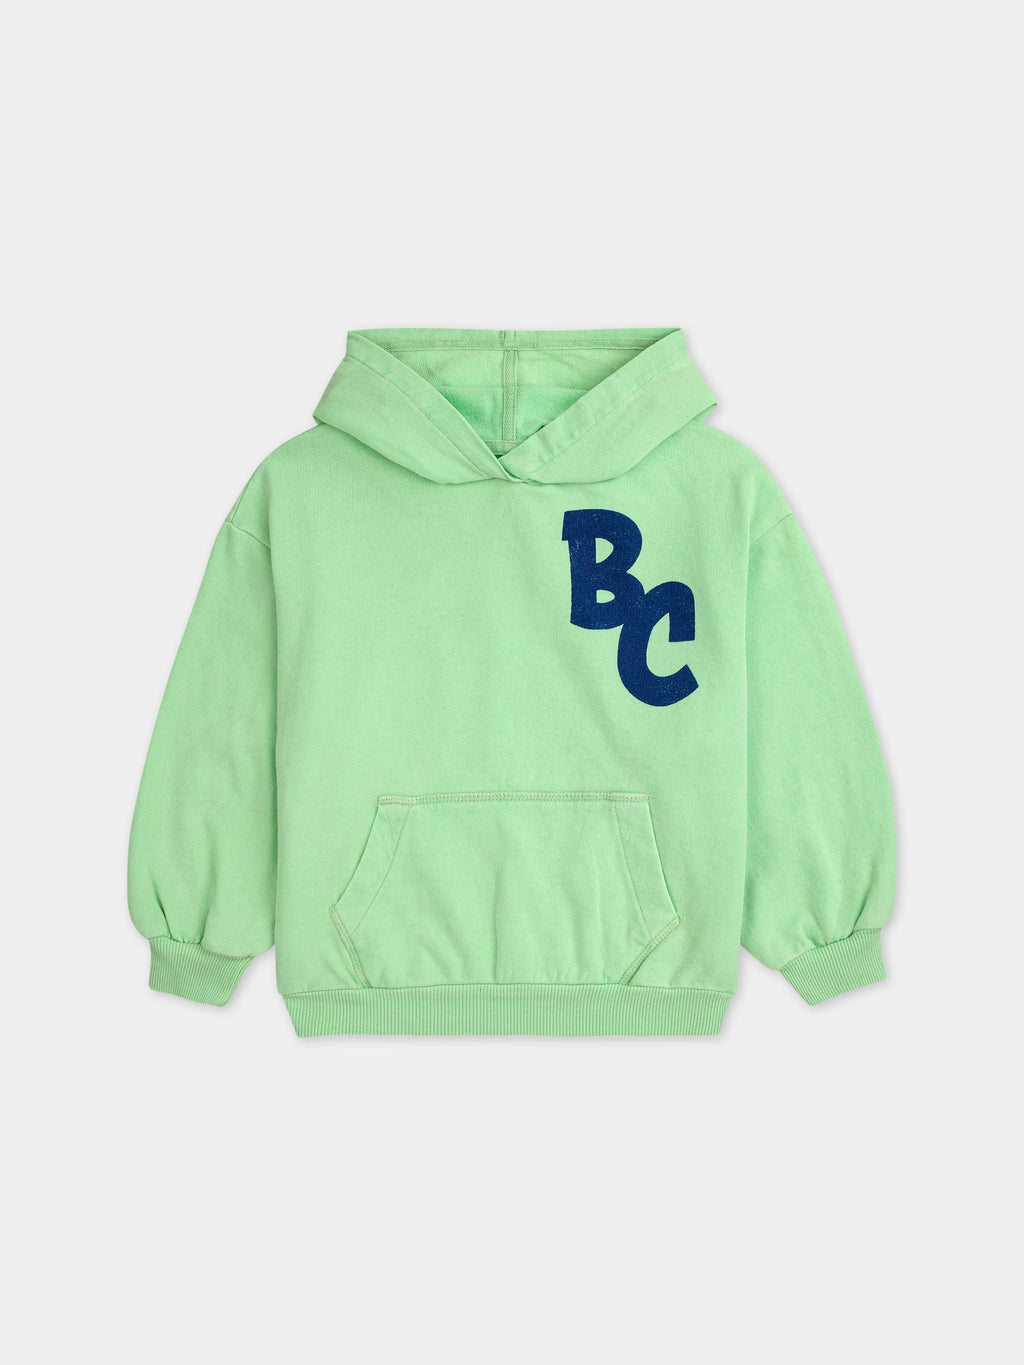 Green sweatshirt for kids with multicolor logo